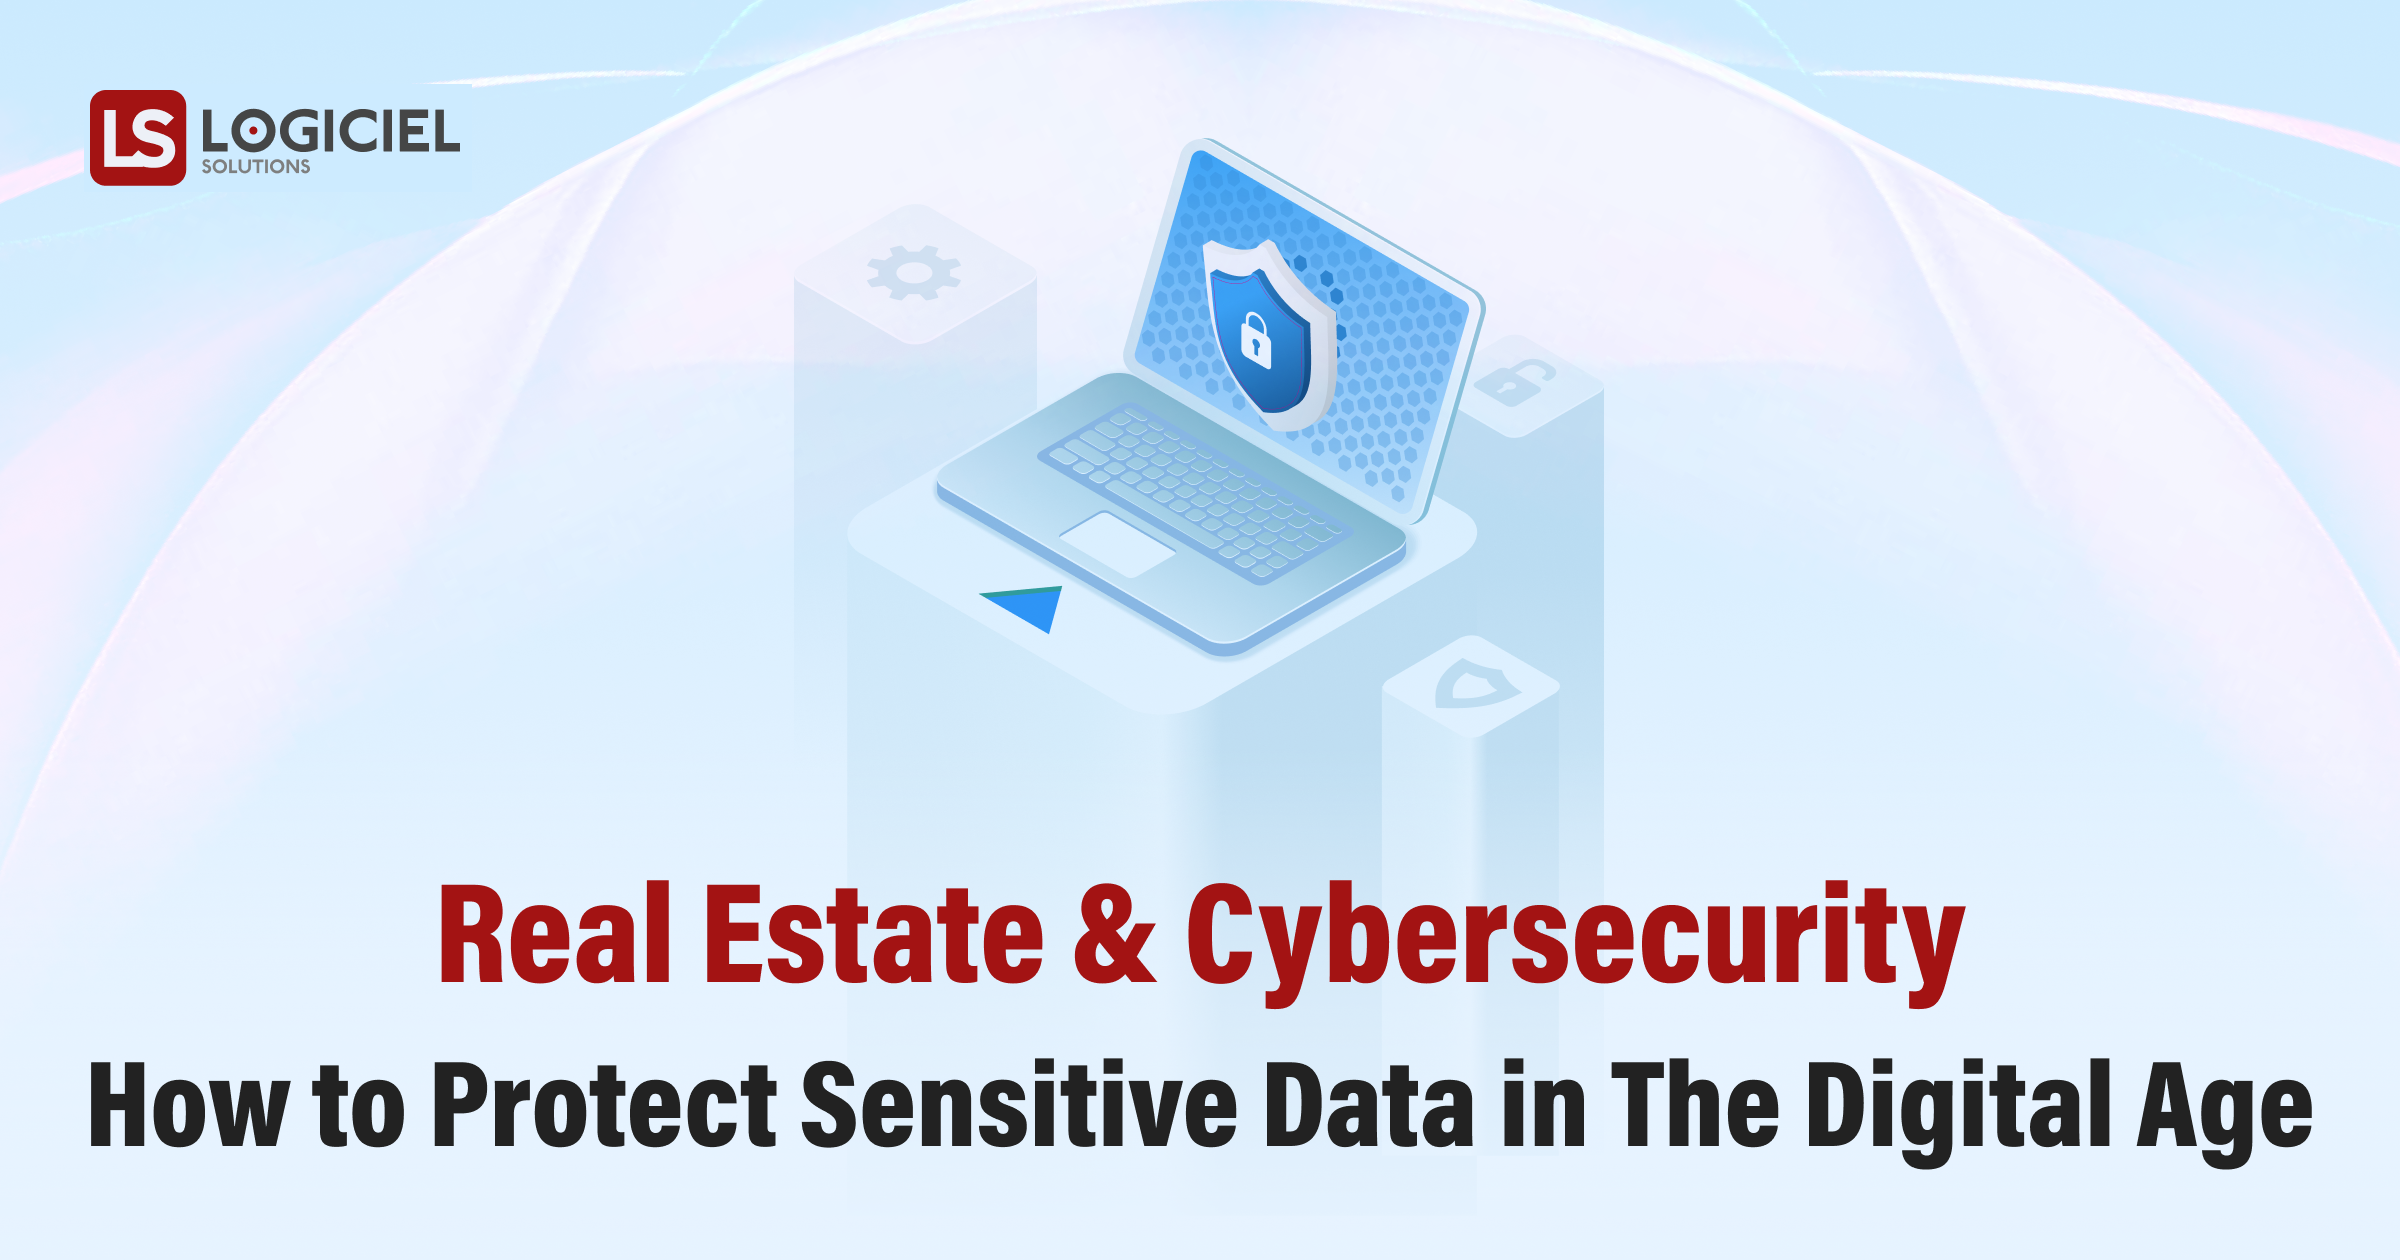 How to Protect Sensitive Data in The Digital Age